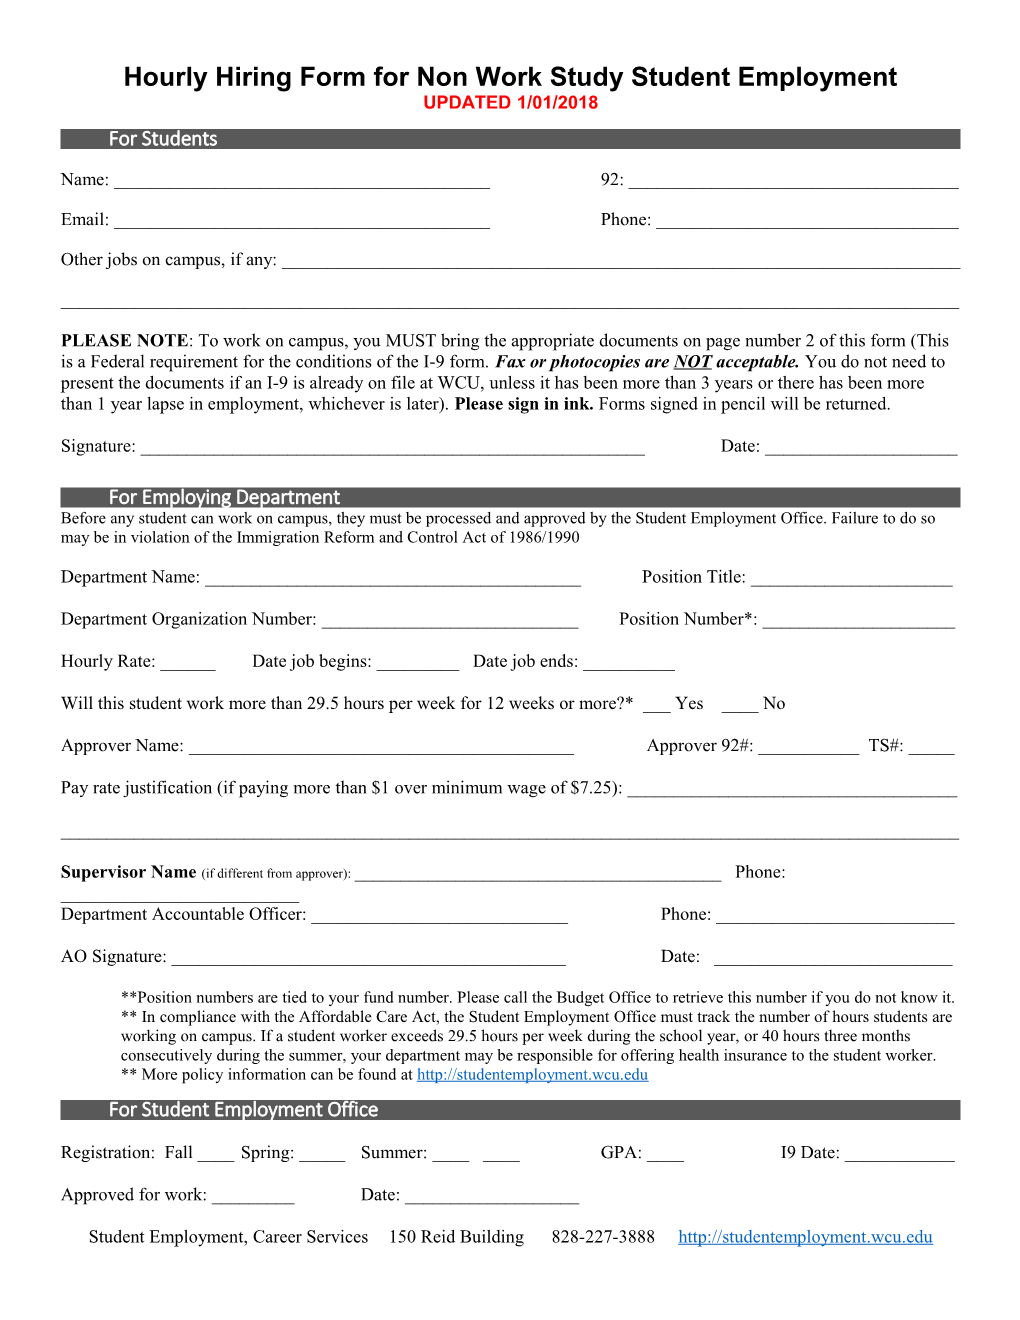 Hourly Hiring Form for Non Work Study Student Employment